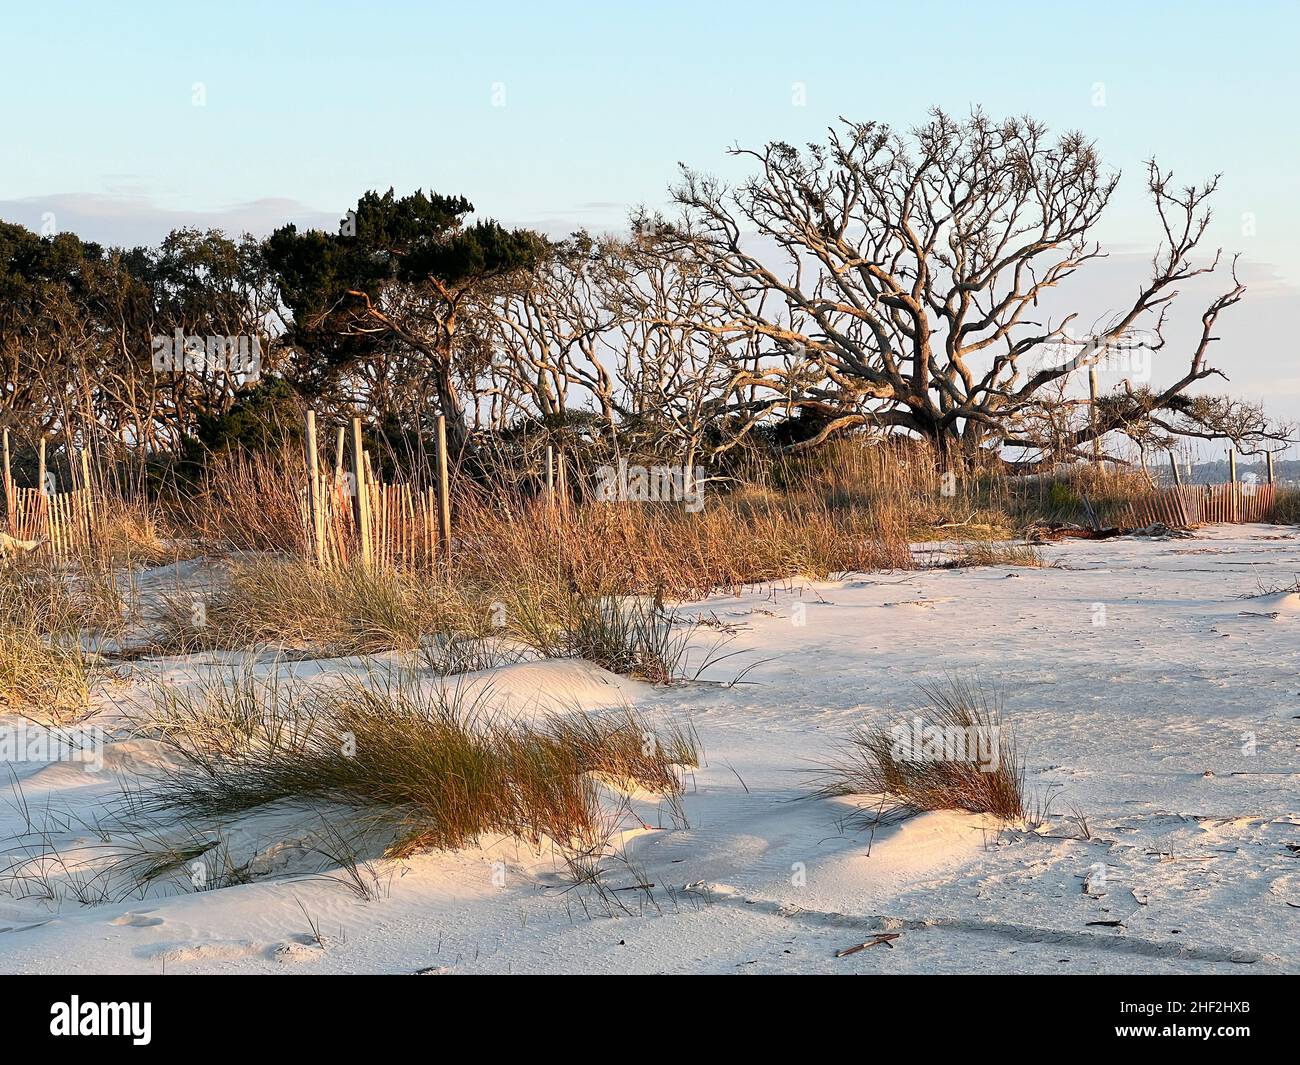 An expanse of beach is out of bounds to humans while nature restores the reclaimed area near driftwood beach, Jekyll Island, Georgia, USA. Stock Photo